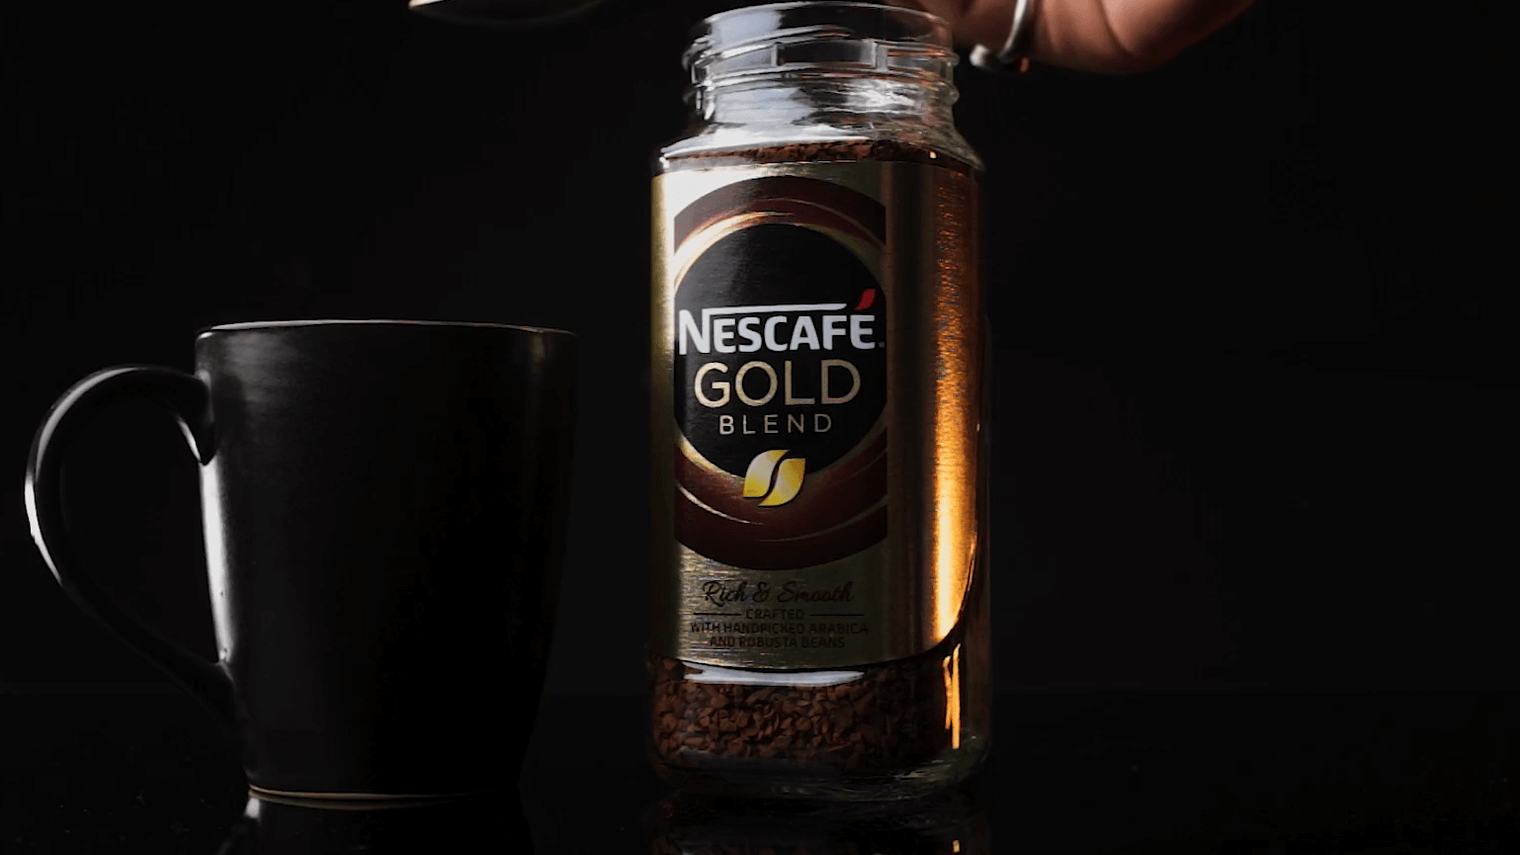 Nescafe Gold - Smell the coffee